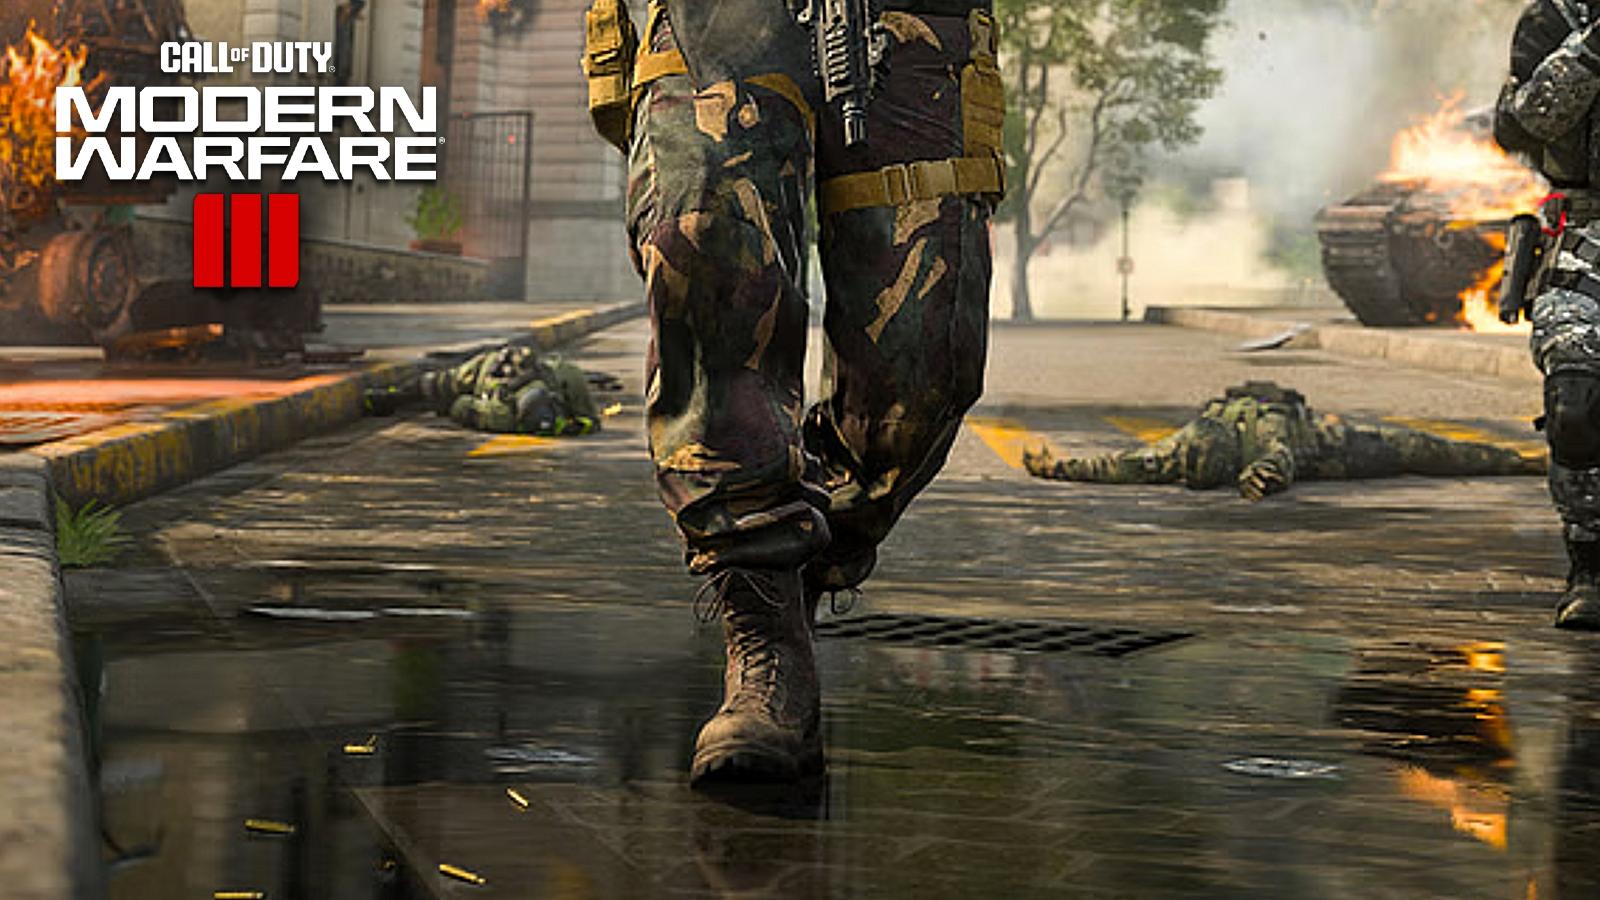 player's running boots in Warzone with Modern Warfare 3 logo in top left corner